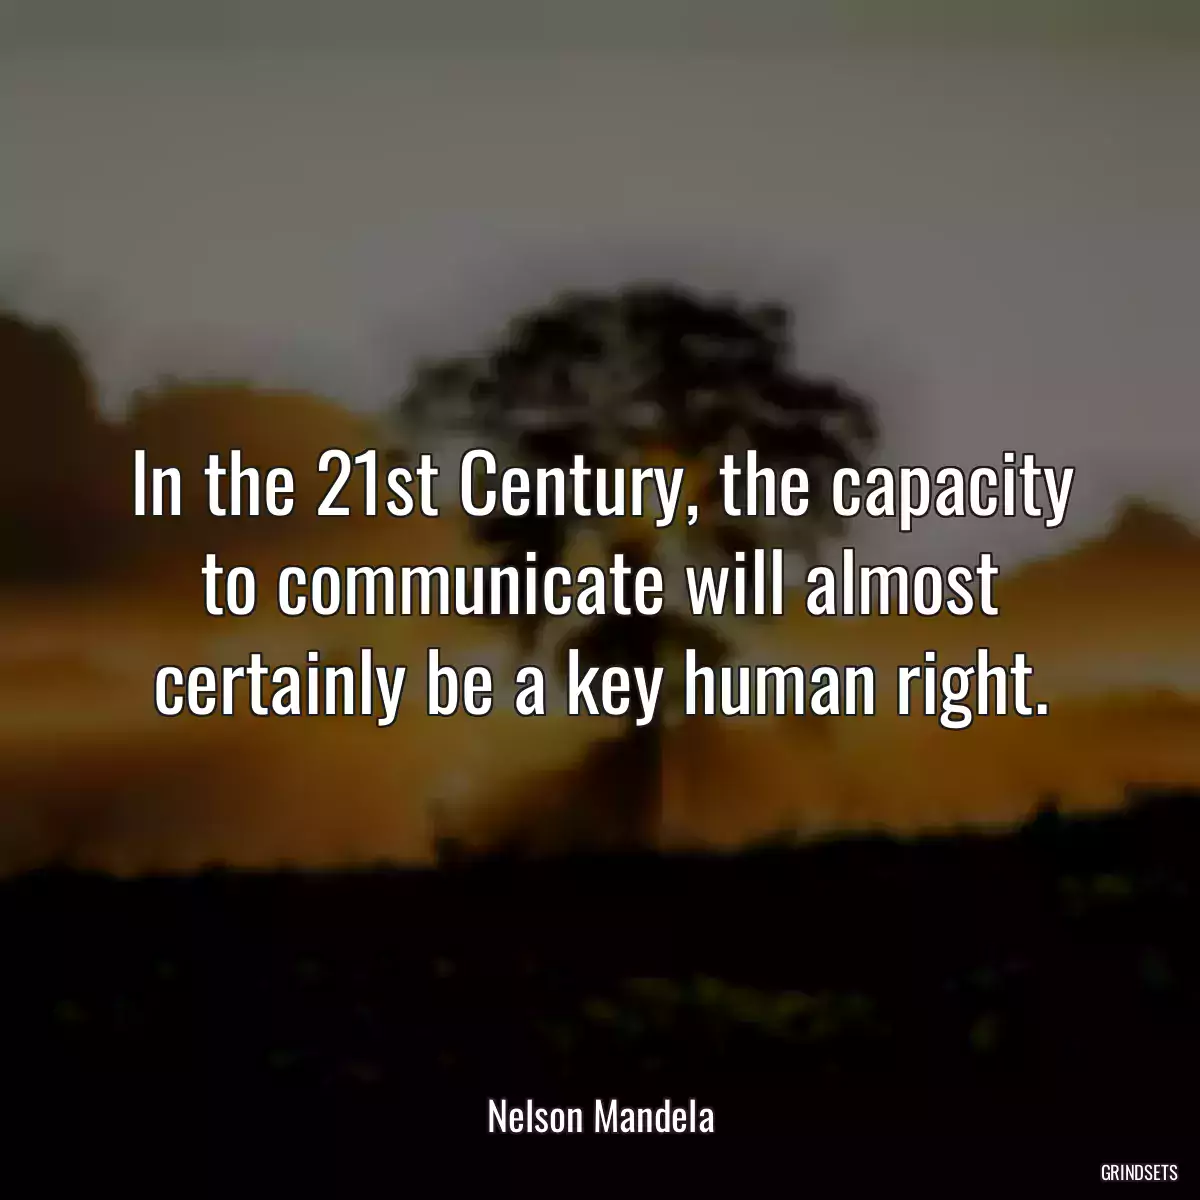 In the 21st Century, the capacity to communicate will almost certainly be a key human right.